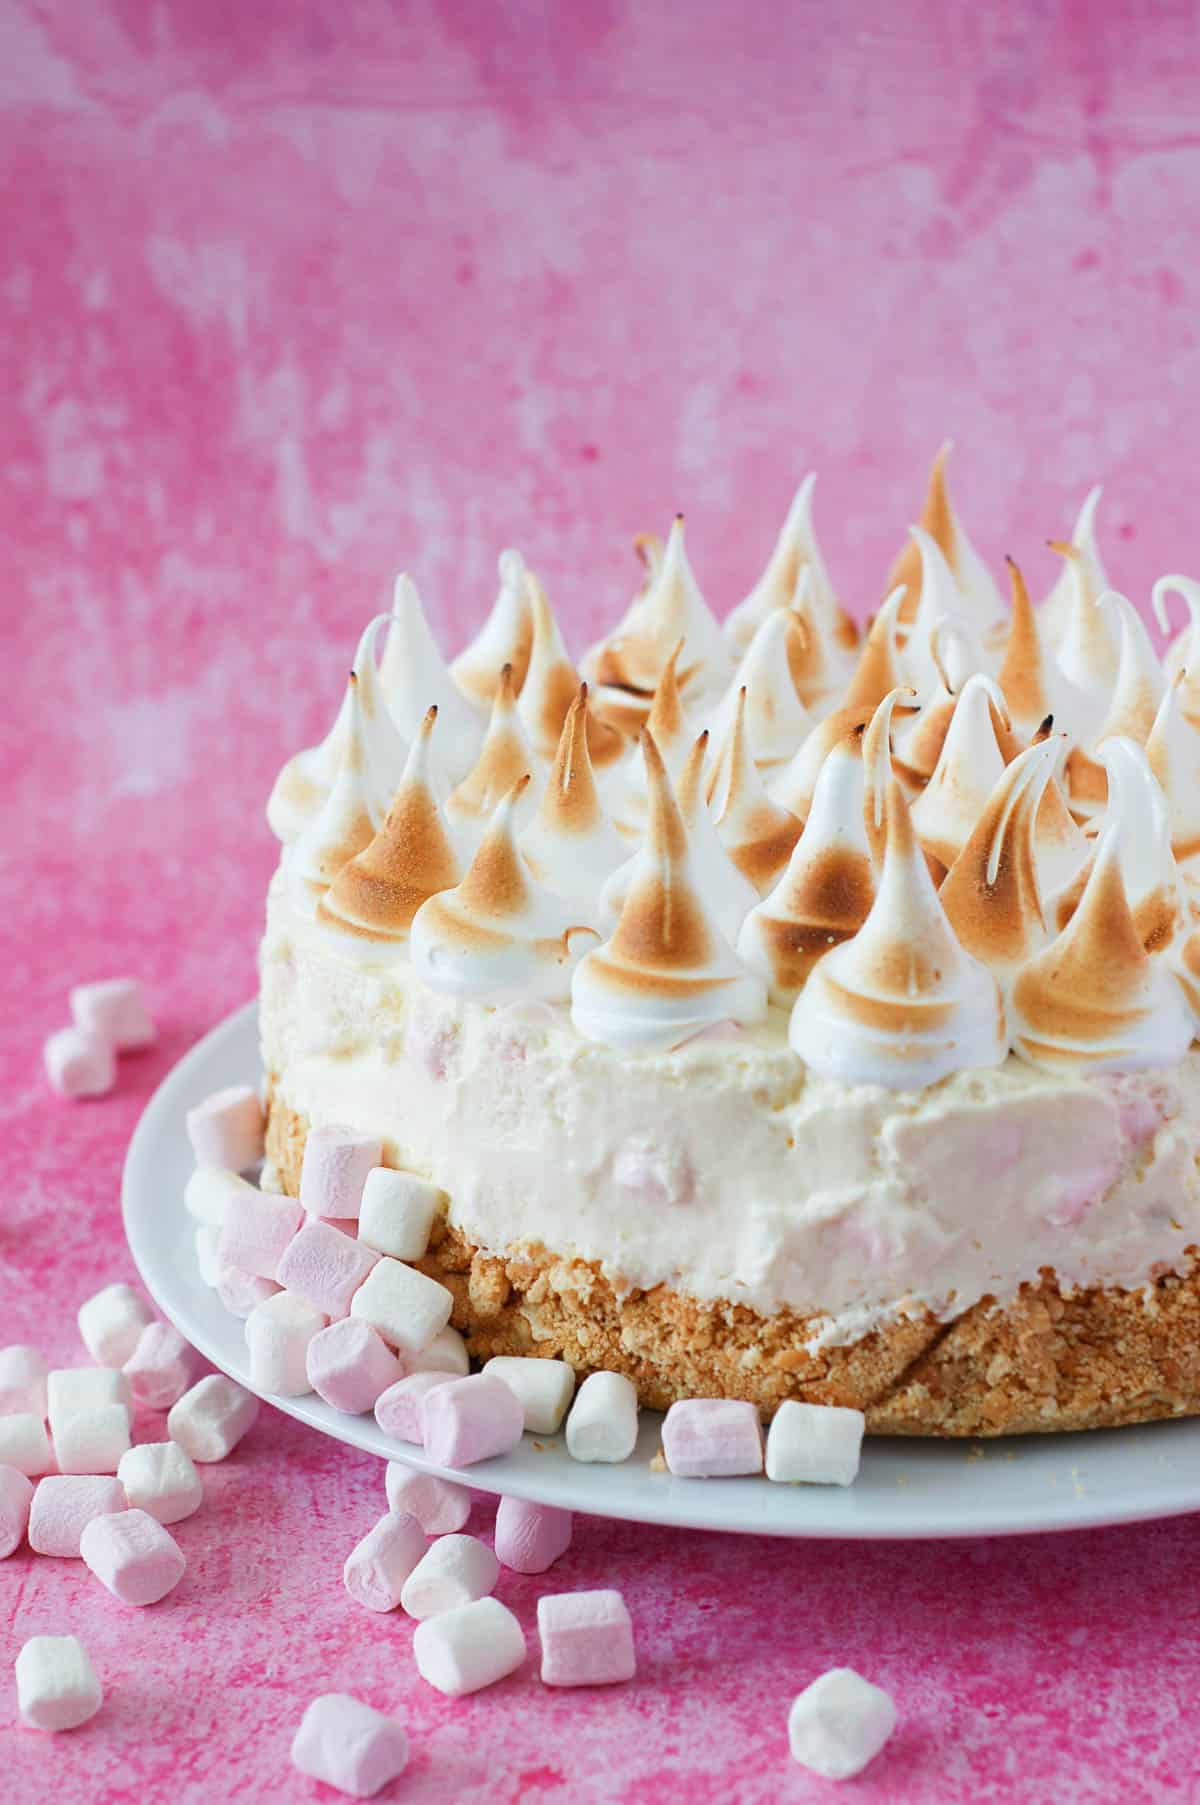 Marshmallow tart on a white plate with peaks of piped marshmallow fluff on top